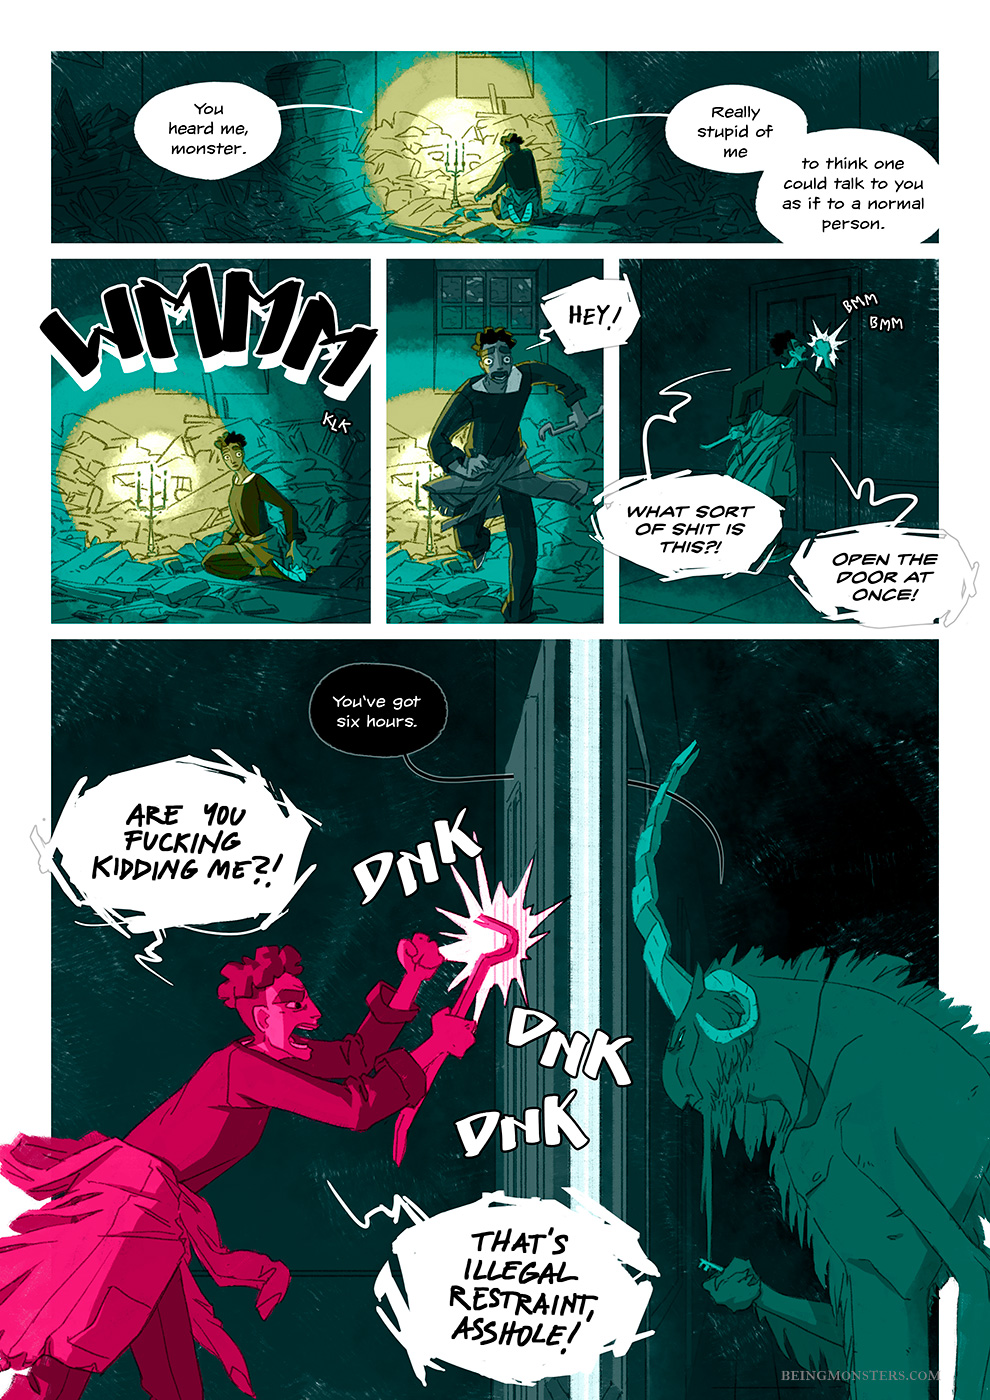 Being Monsters Book 2 Chapter 7 Page 07 EN